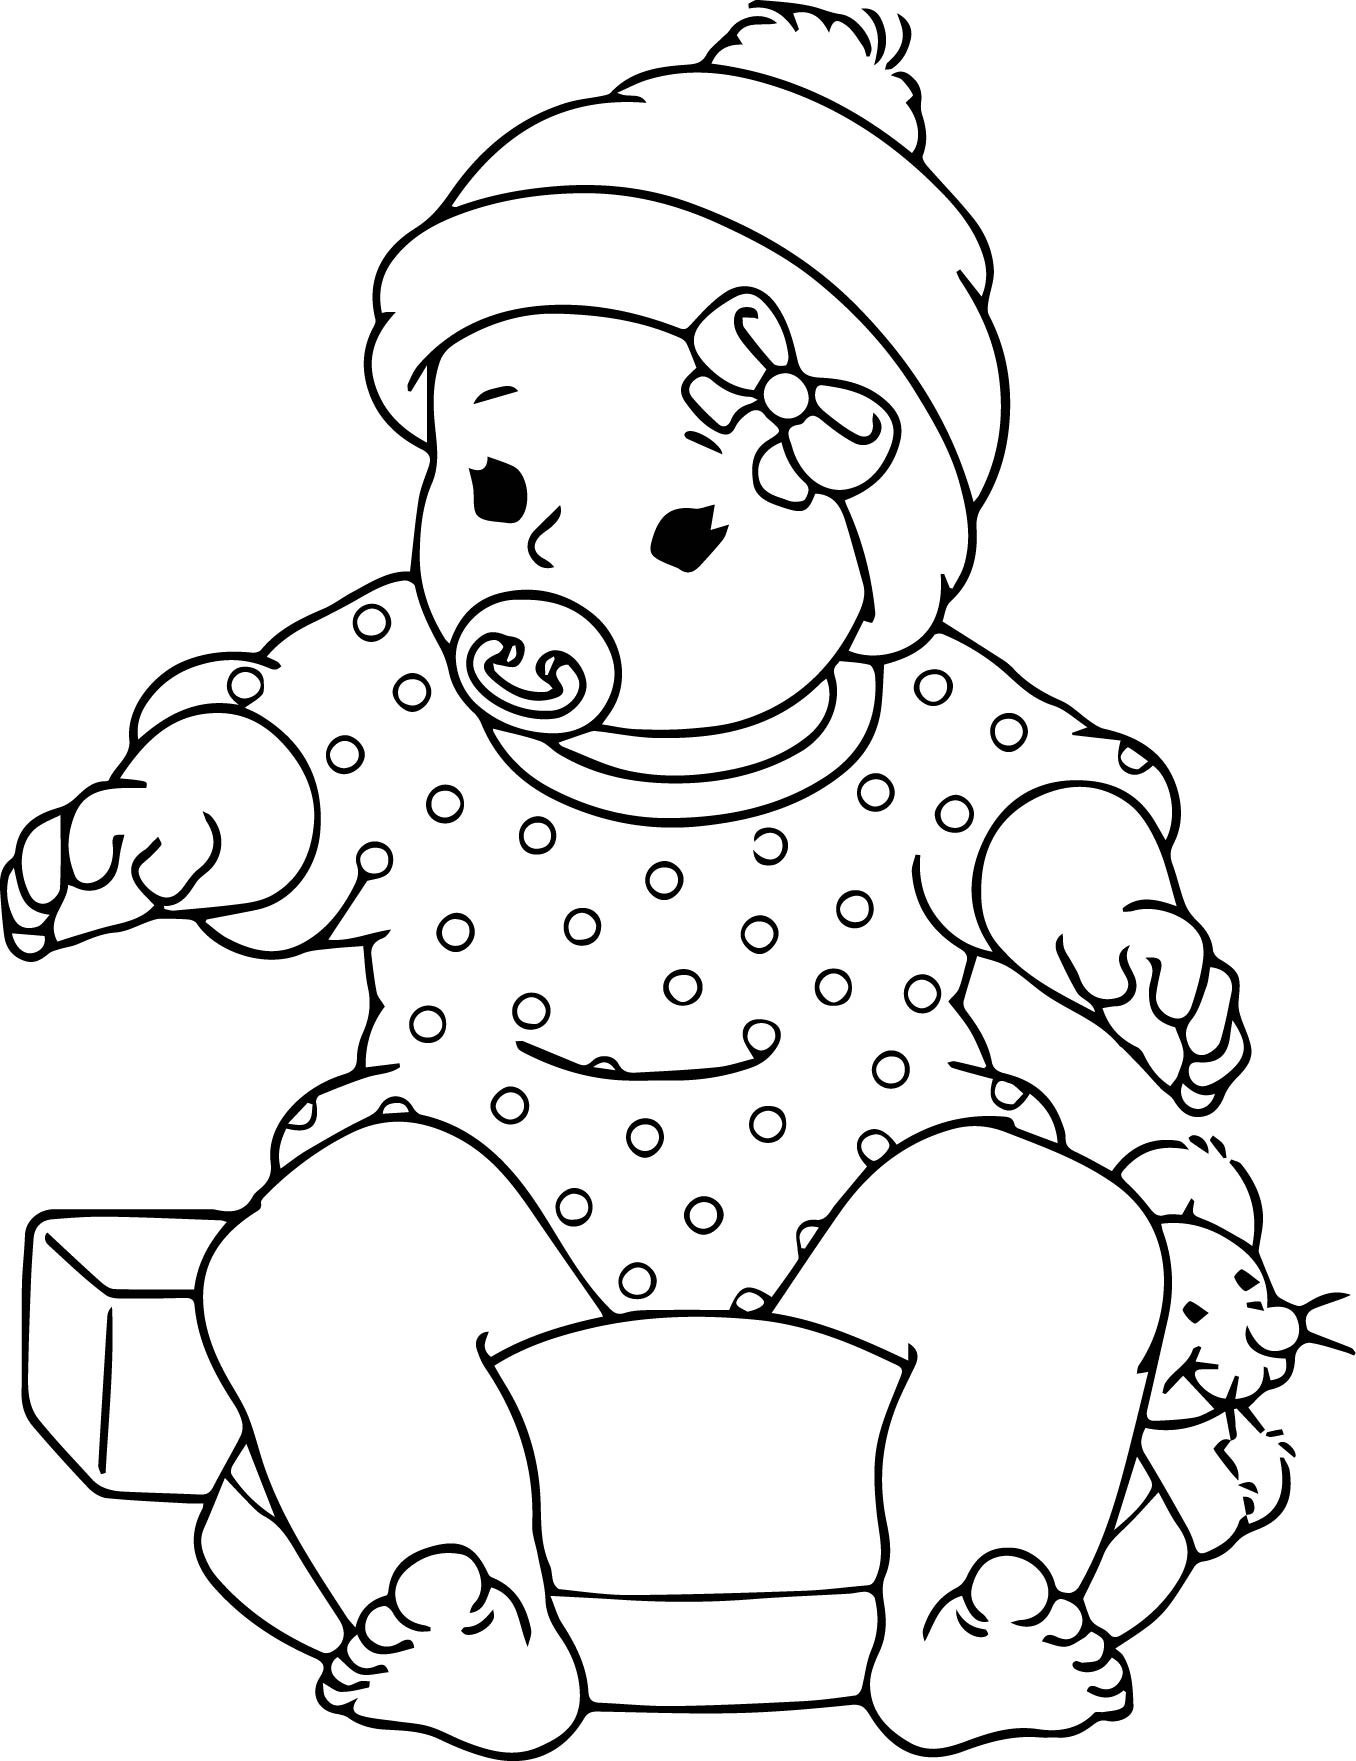 Lol Dolls Printable Coloring Pages at GetColorings.com | Free printable colorings pages to print ...